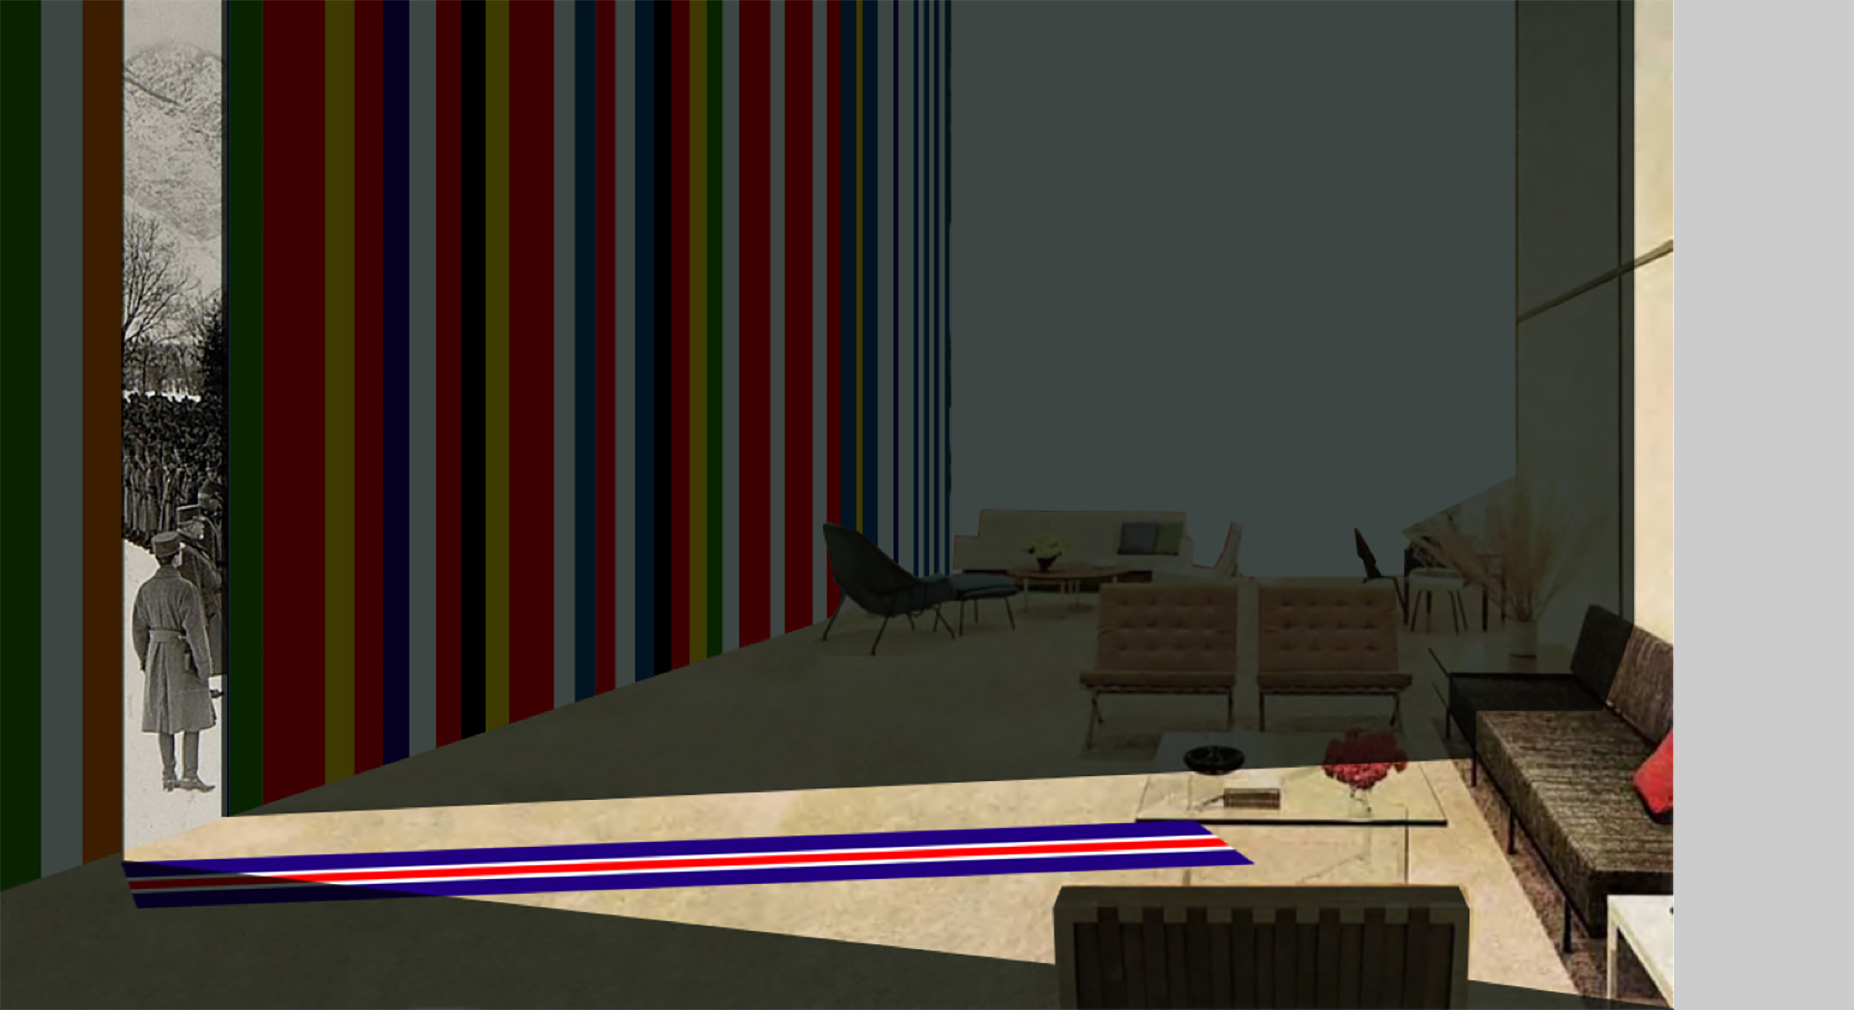 Pan-European Living Room installation sketch by OMA